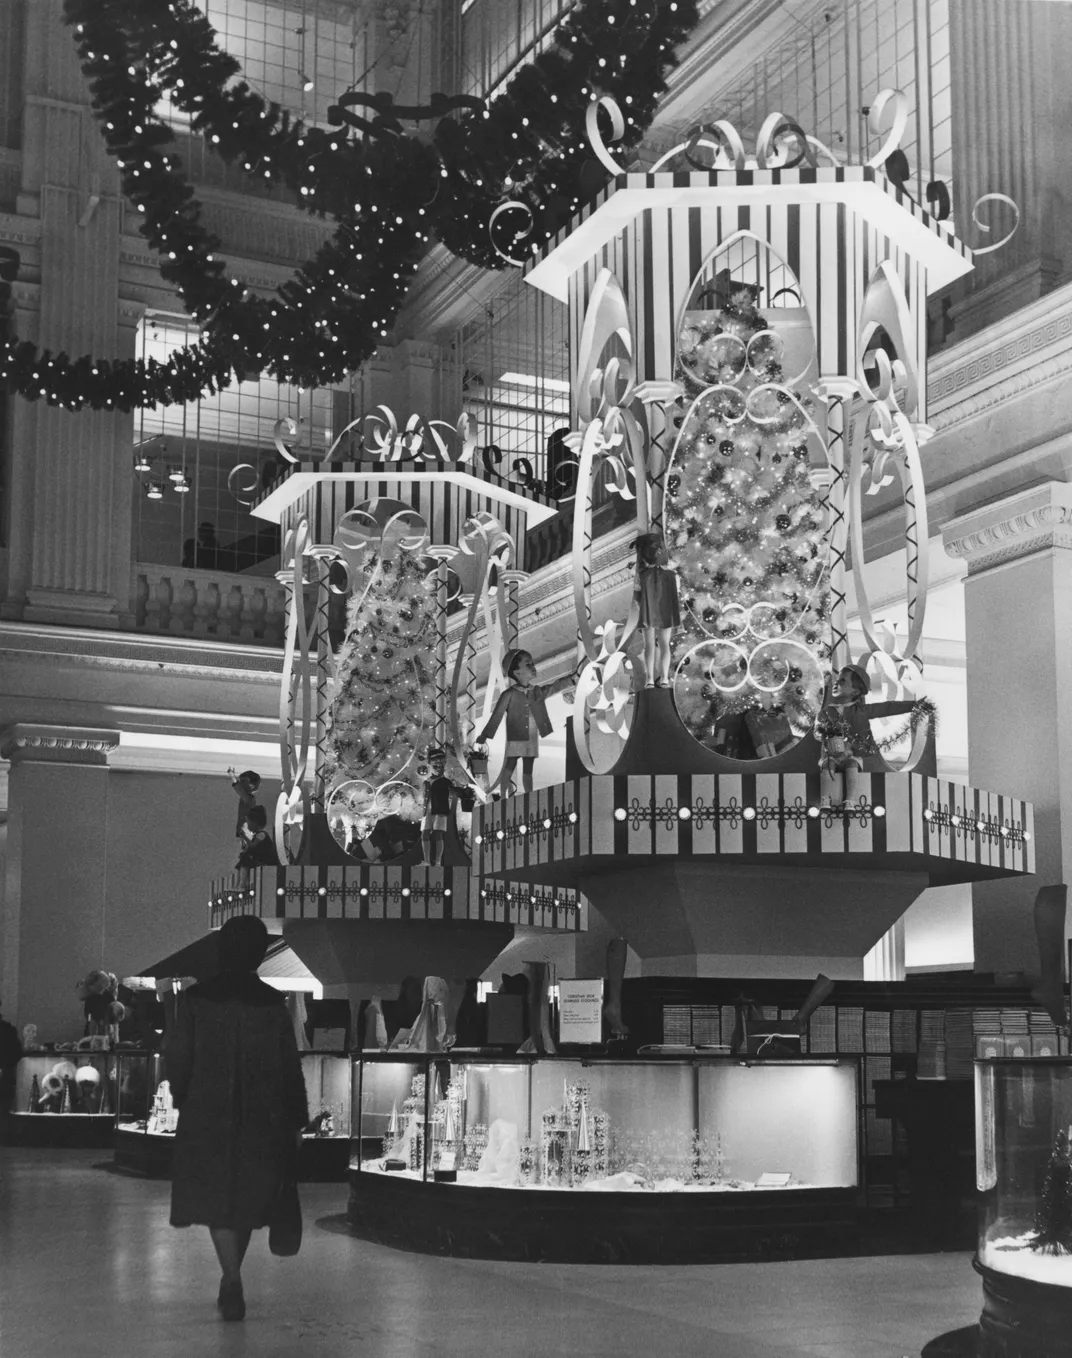 A woman strolls through a holiday shopping display at the Marshall Field's department store in Chicago, circa 1960s